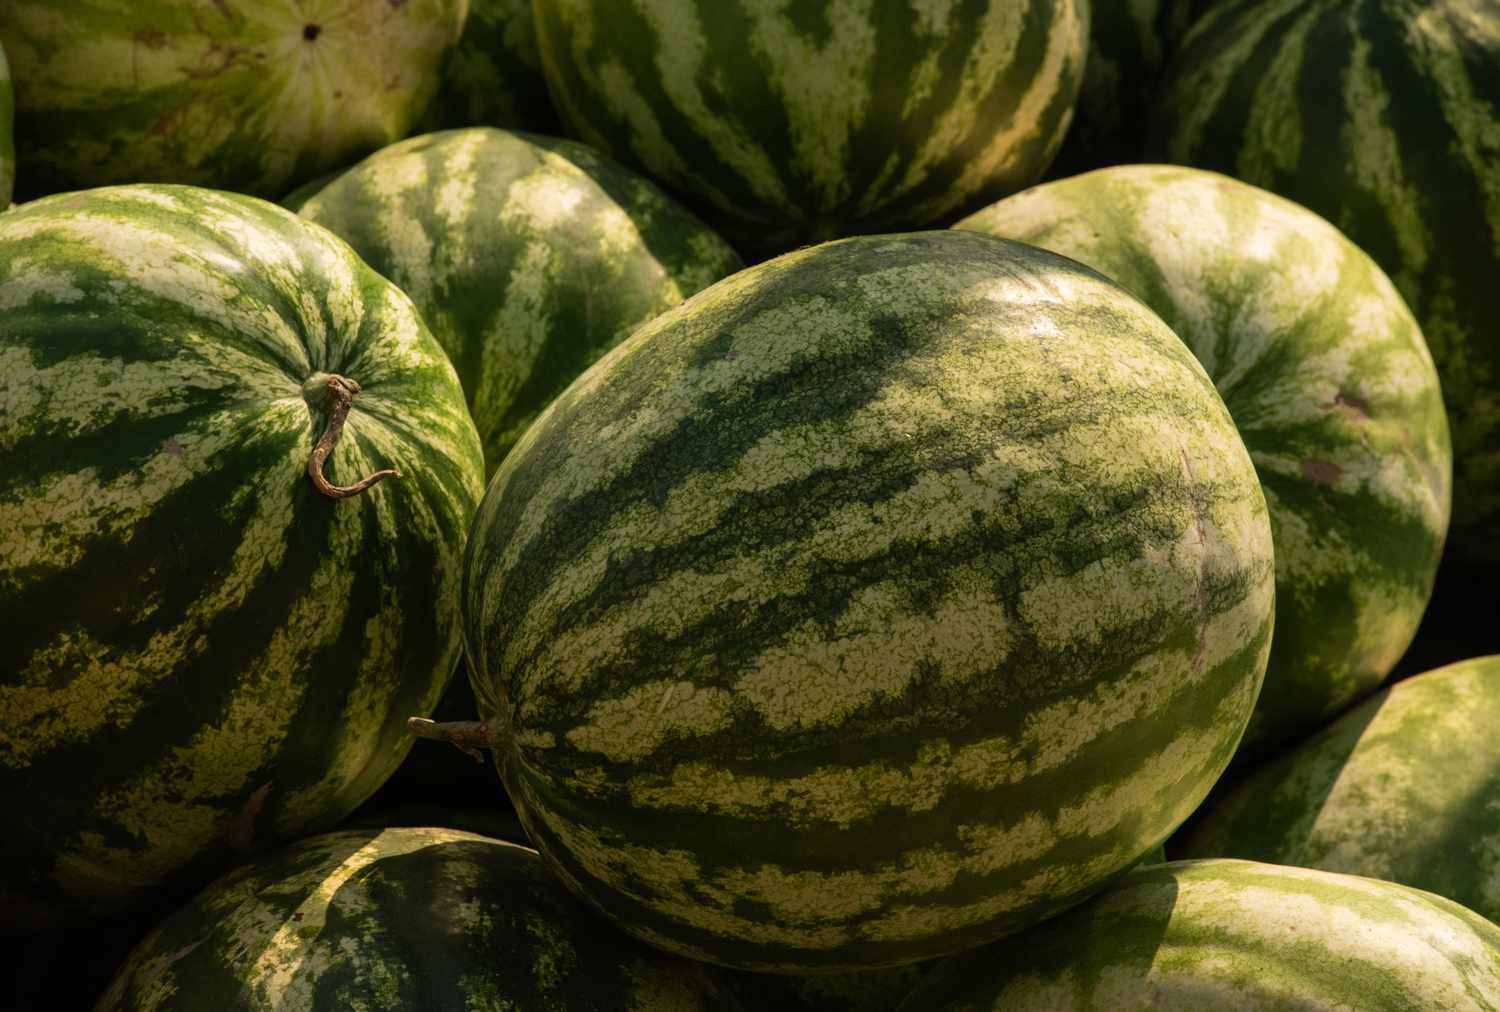 Here’s How to Pick a Juicy, Perfectly Ripe Watermelon